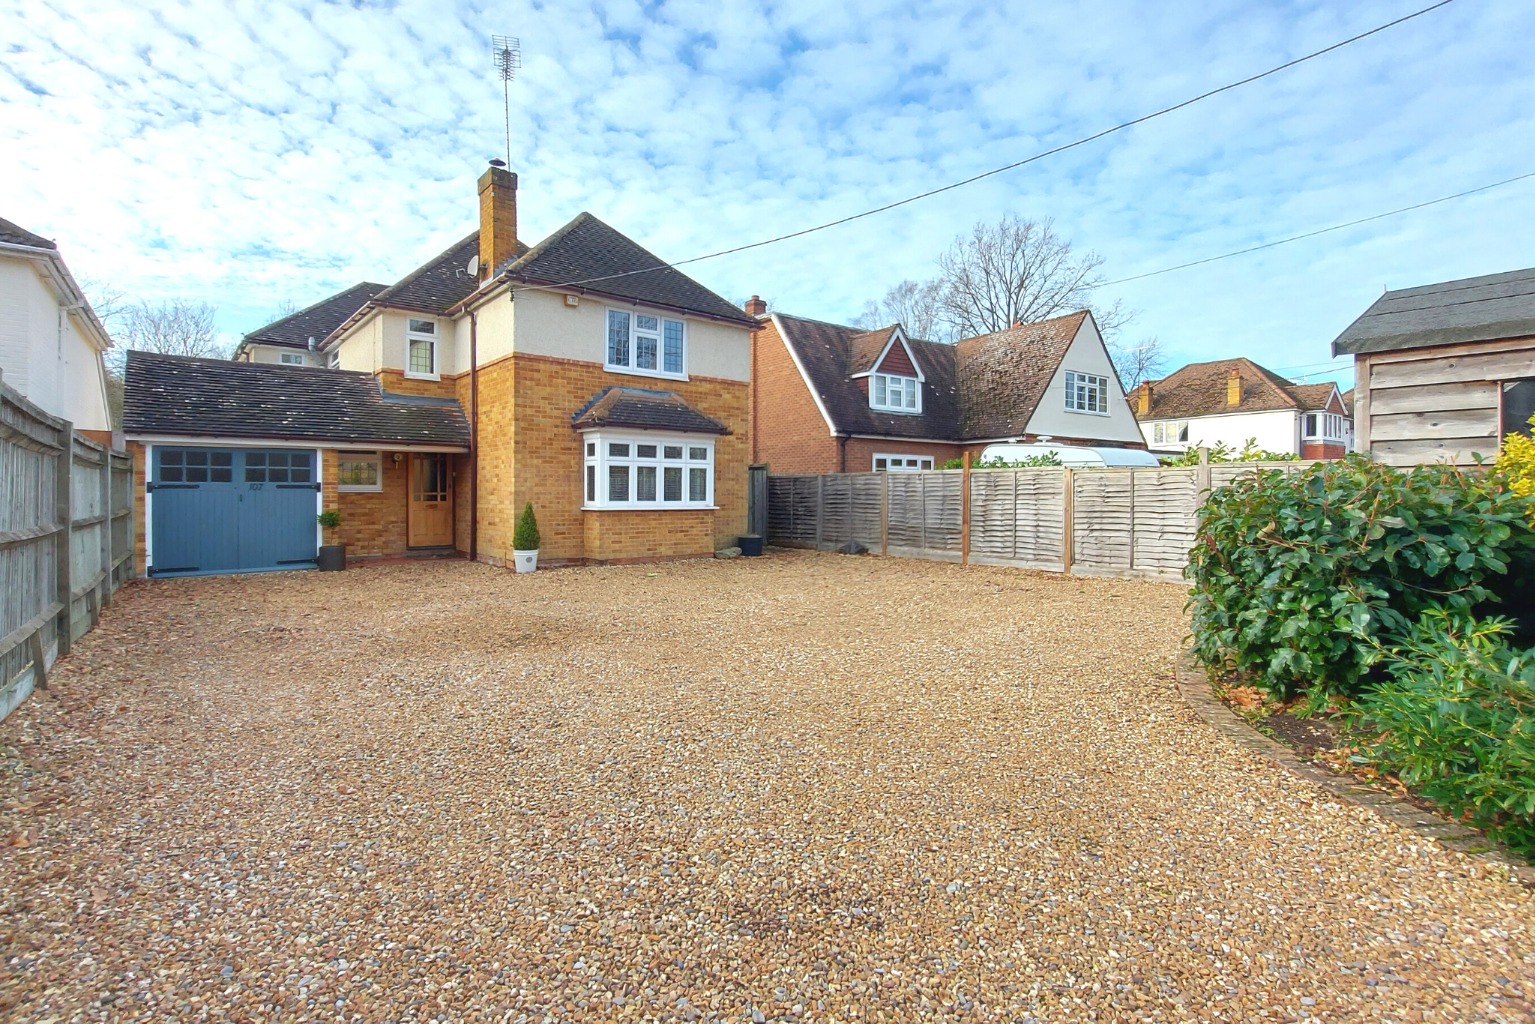 4 bed detached house for sale in Reading Road, Wokingham - Property Image 1